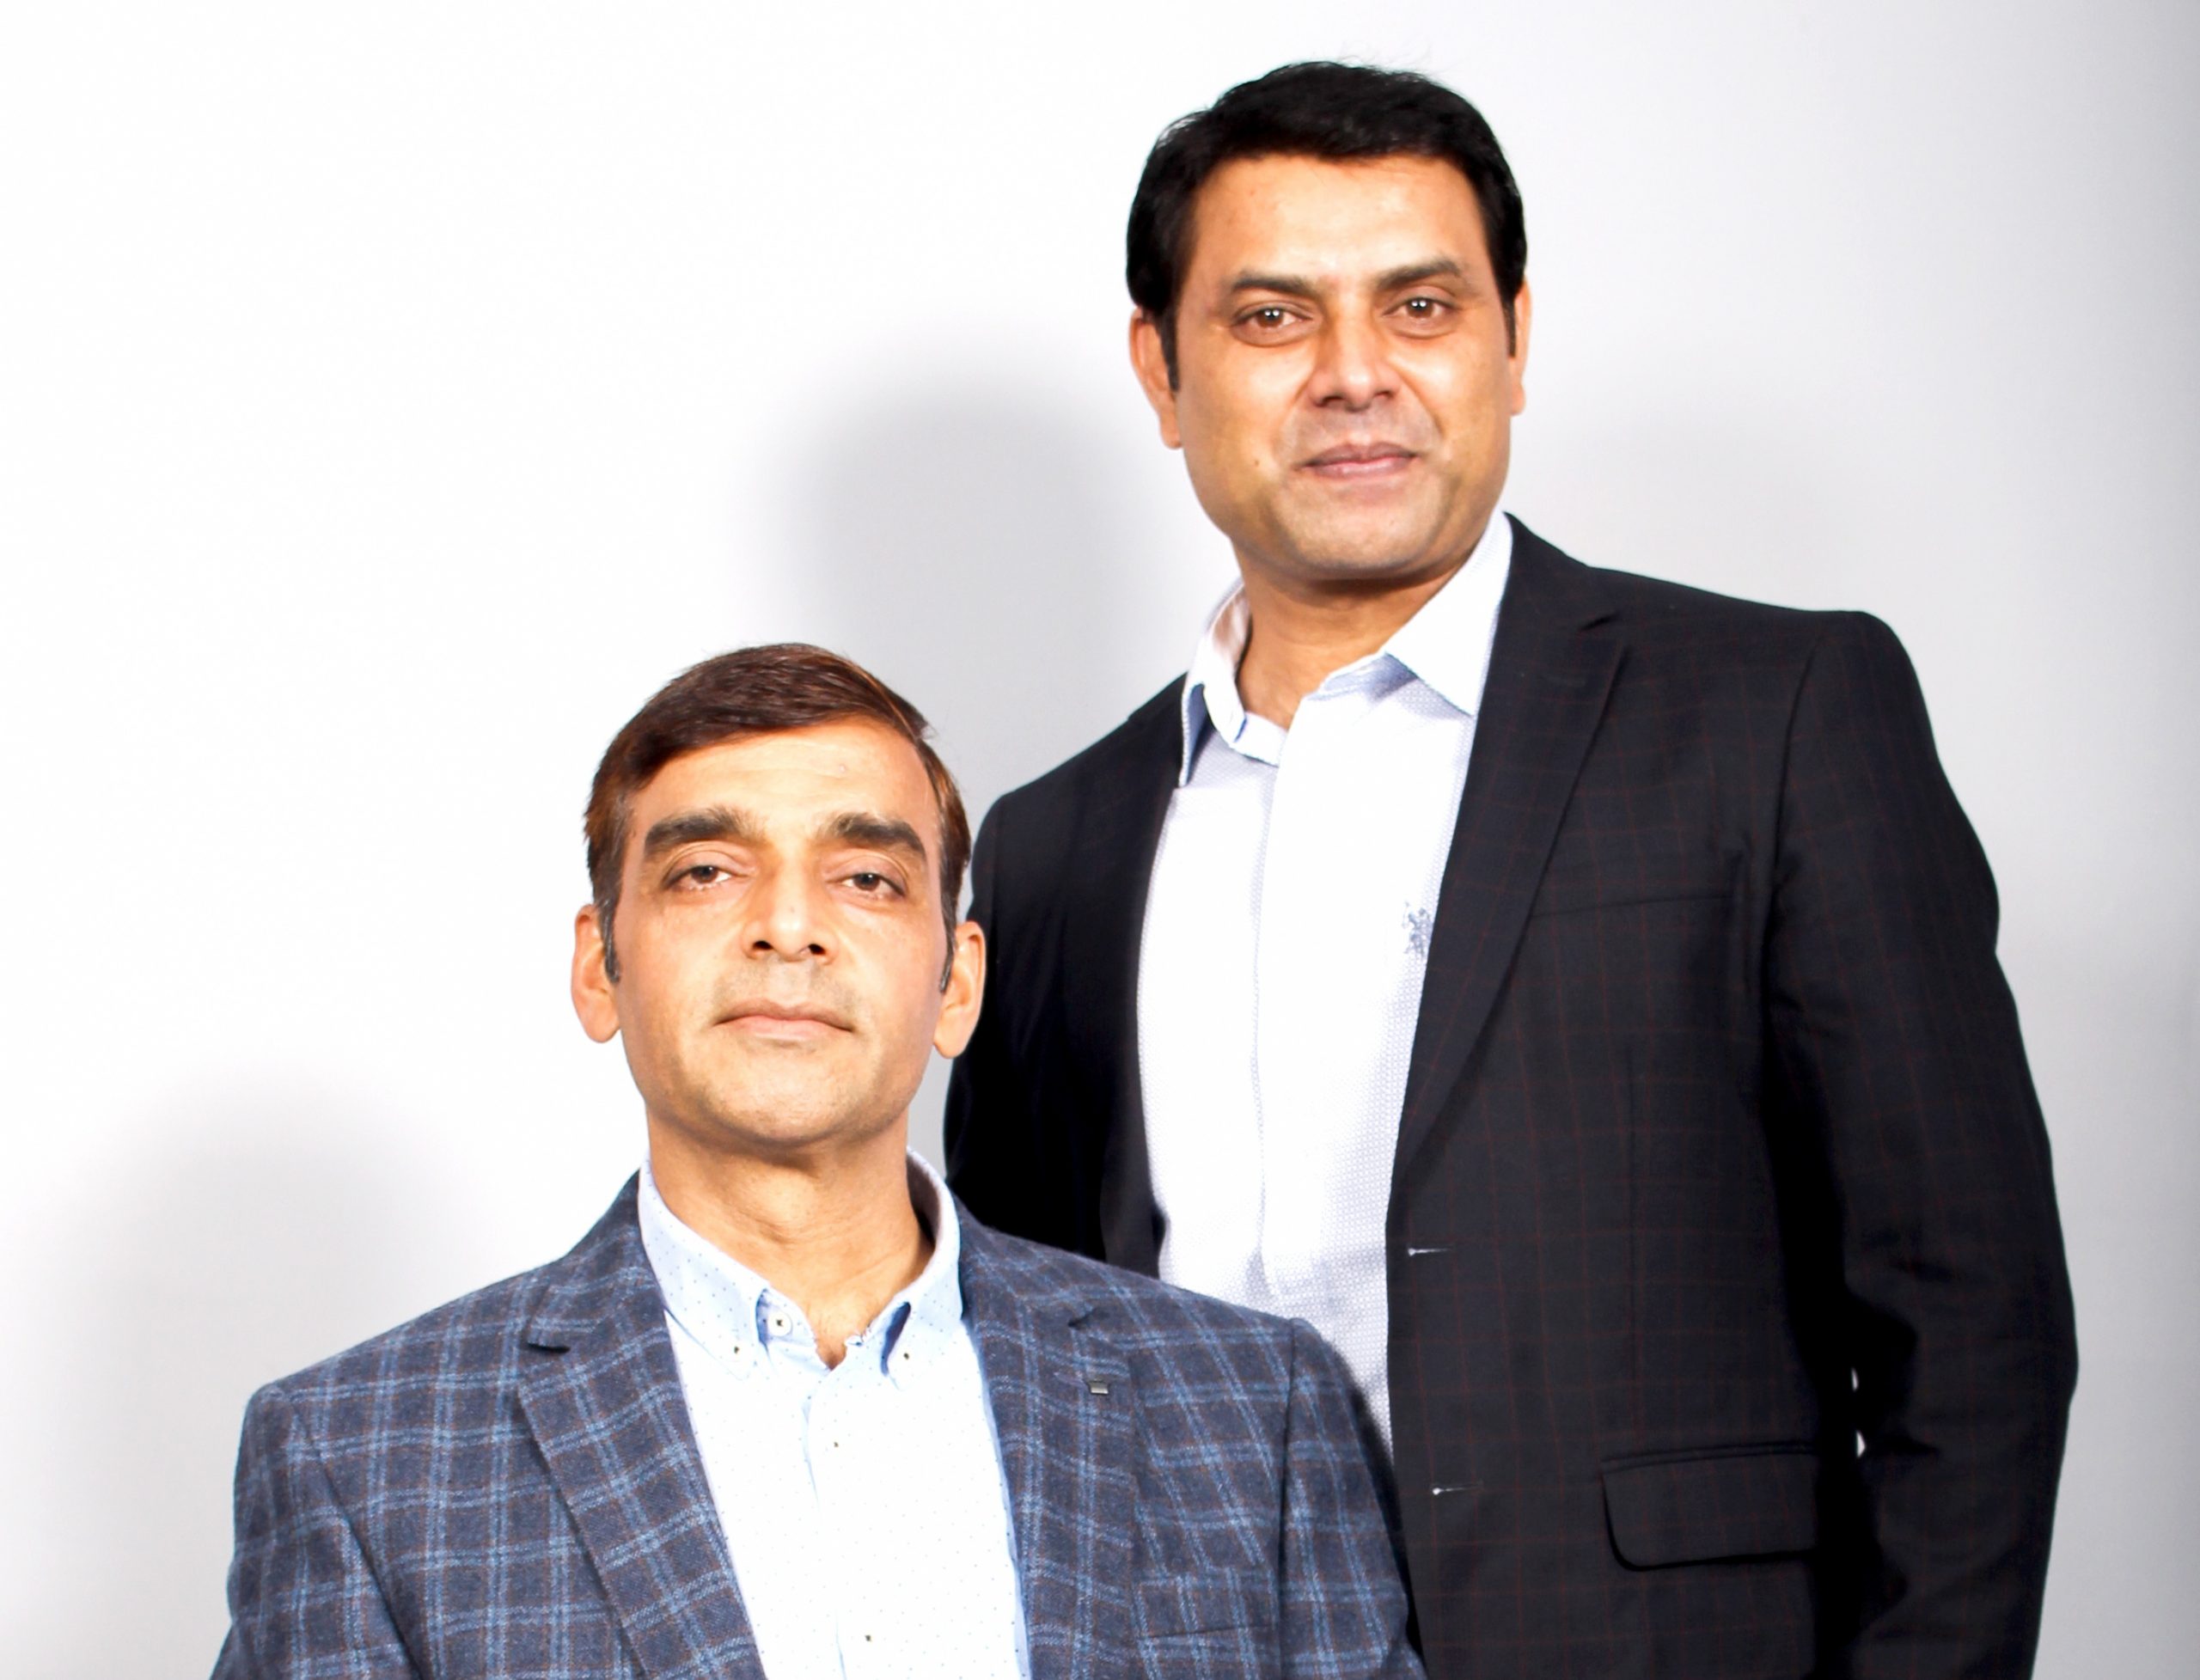 Rajasthan Duos Organic Health And Wellness Company Makes Rs 10 Crore Turnover Amid COVID Pandemic